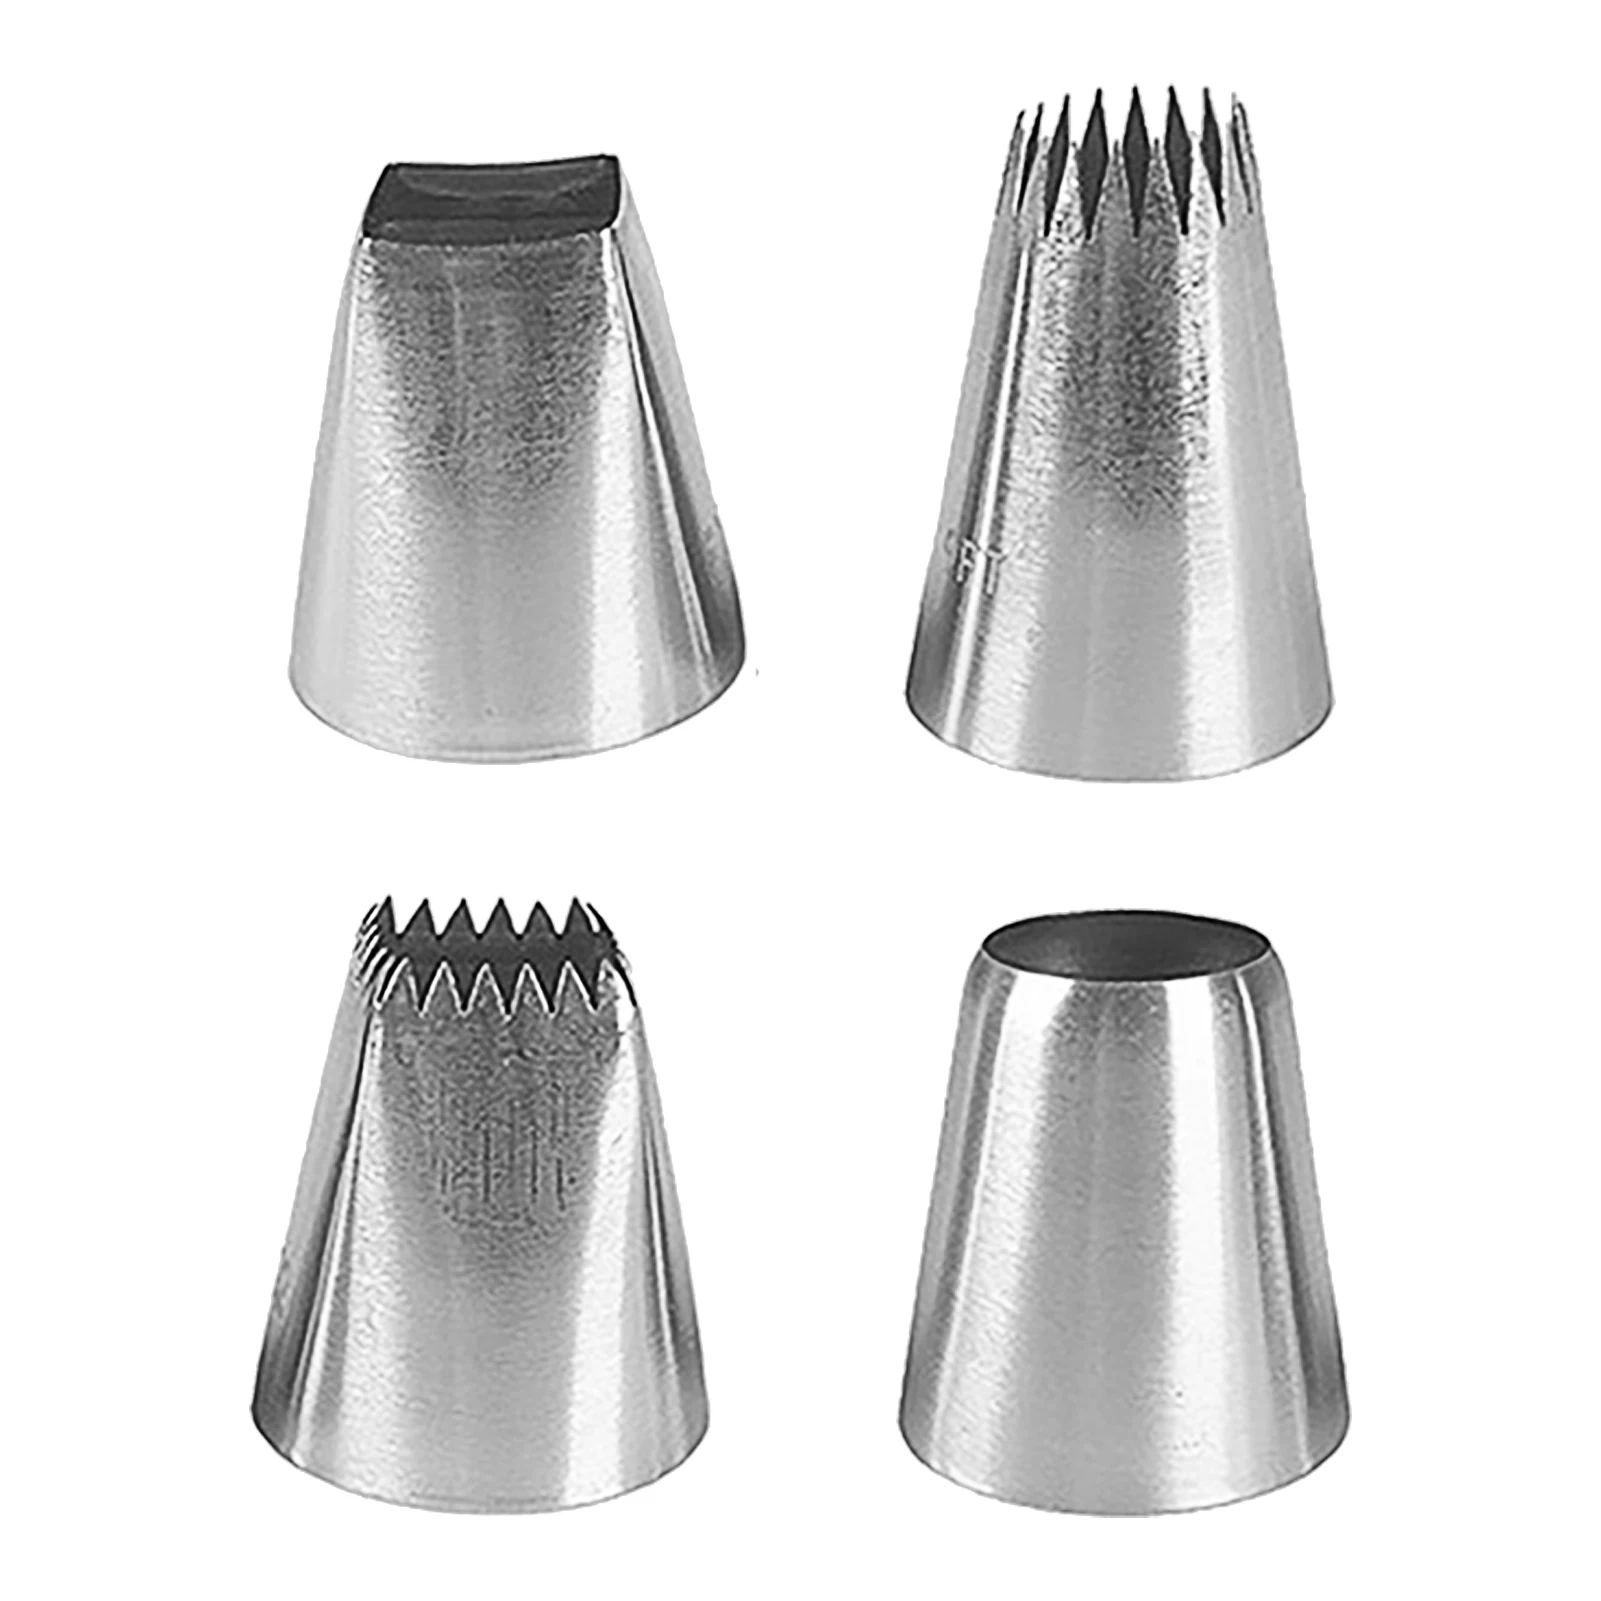 

4pcs Easy Clean Cake Decorating Serrated Cupcake DIY Piping Tip Set Extra Large Muffin Stainless Steel Home Kitchen Square Round